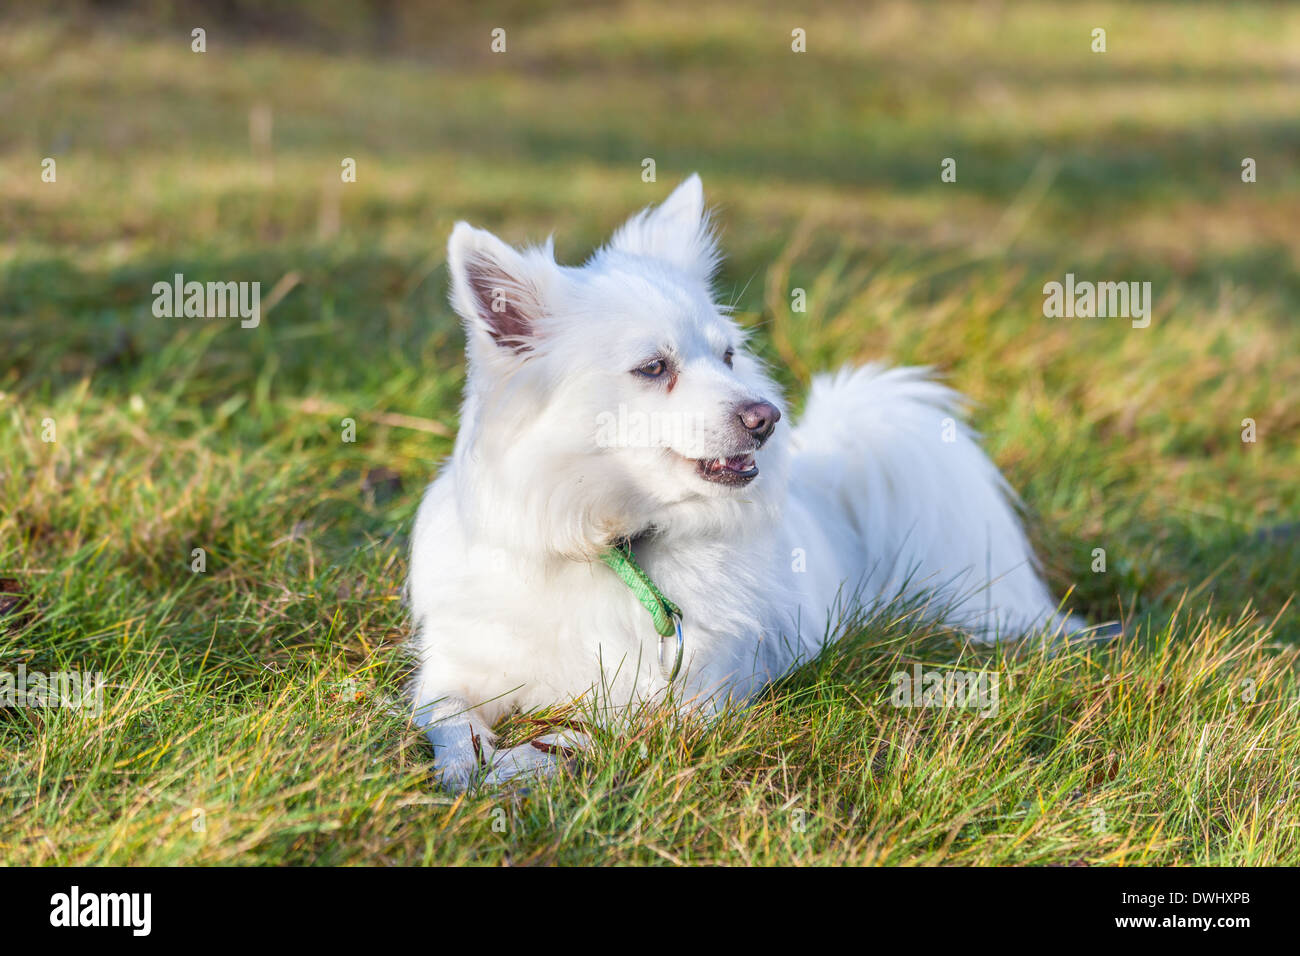 Blanc chien Pomeranian lying on grass field Banque D'Images